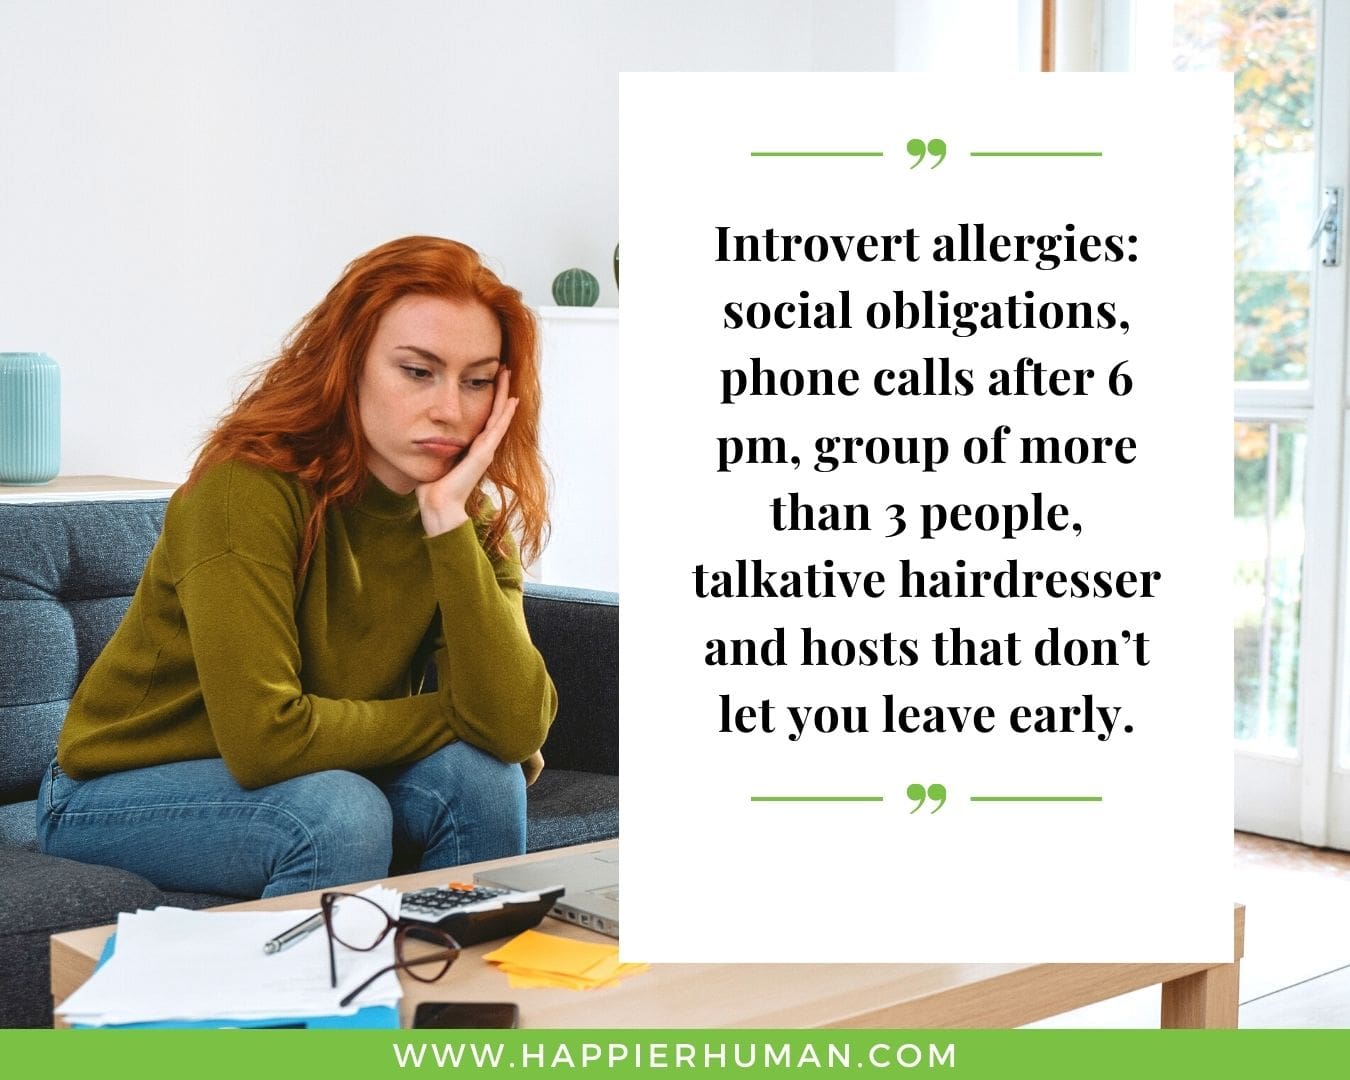 Introvert Quotes - “Introvert allergies: social obligations, phone calls after 6 pm, group of more than 3 people, talkative hairdresser and hosts that don’t let you leave early.”